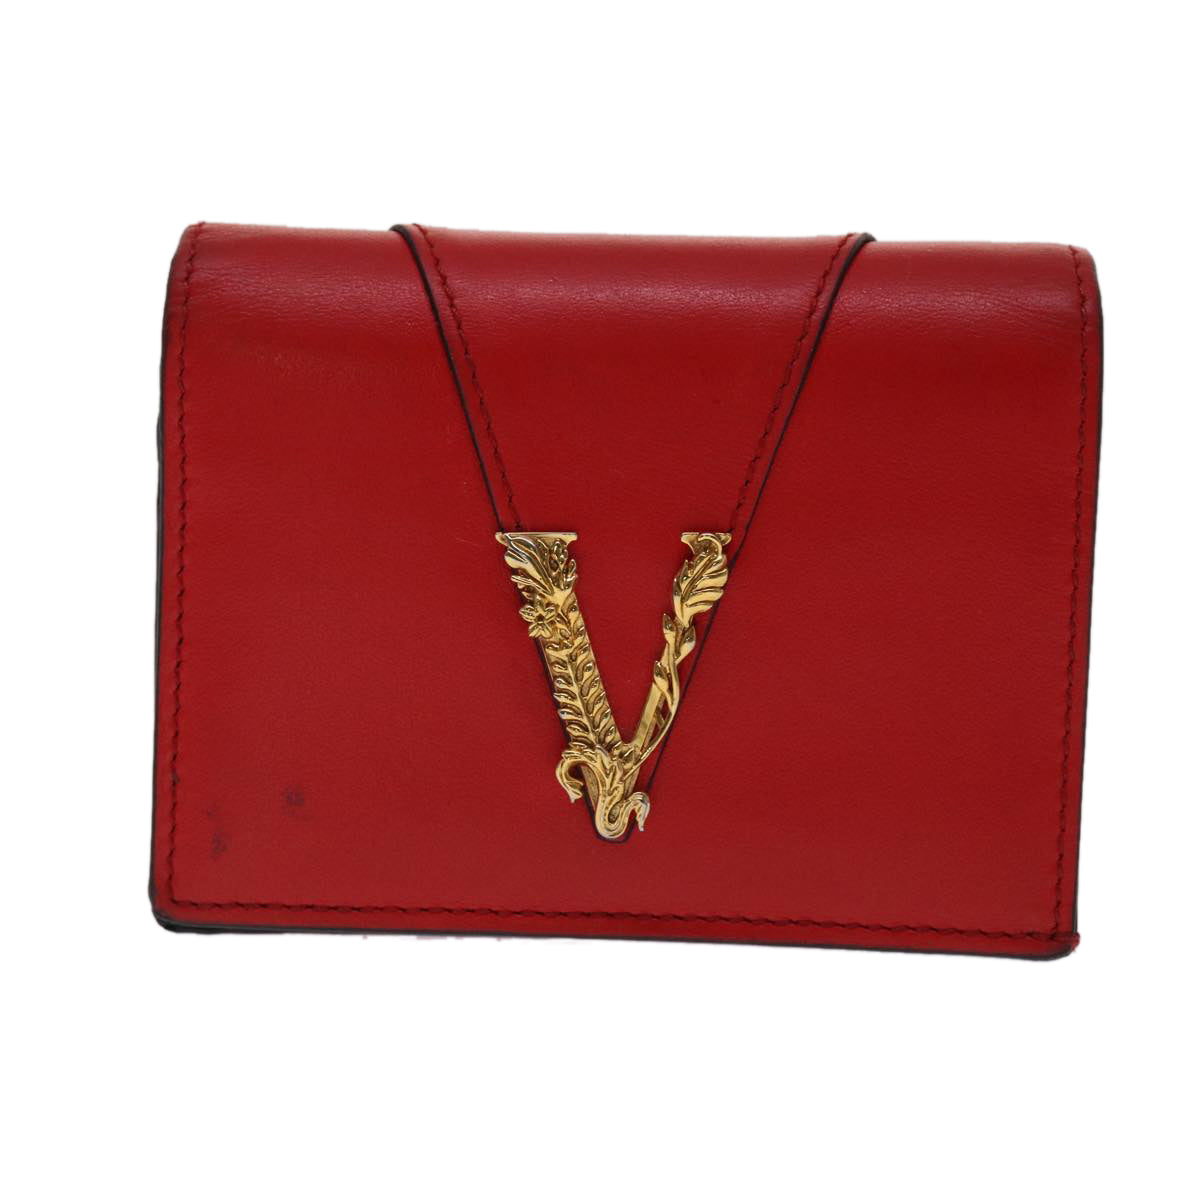 VERSACE Virtus Compact Wallet Leather Red Gold Tone Auth hk797